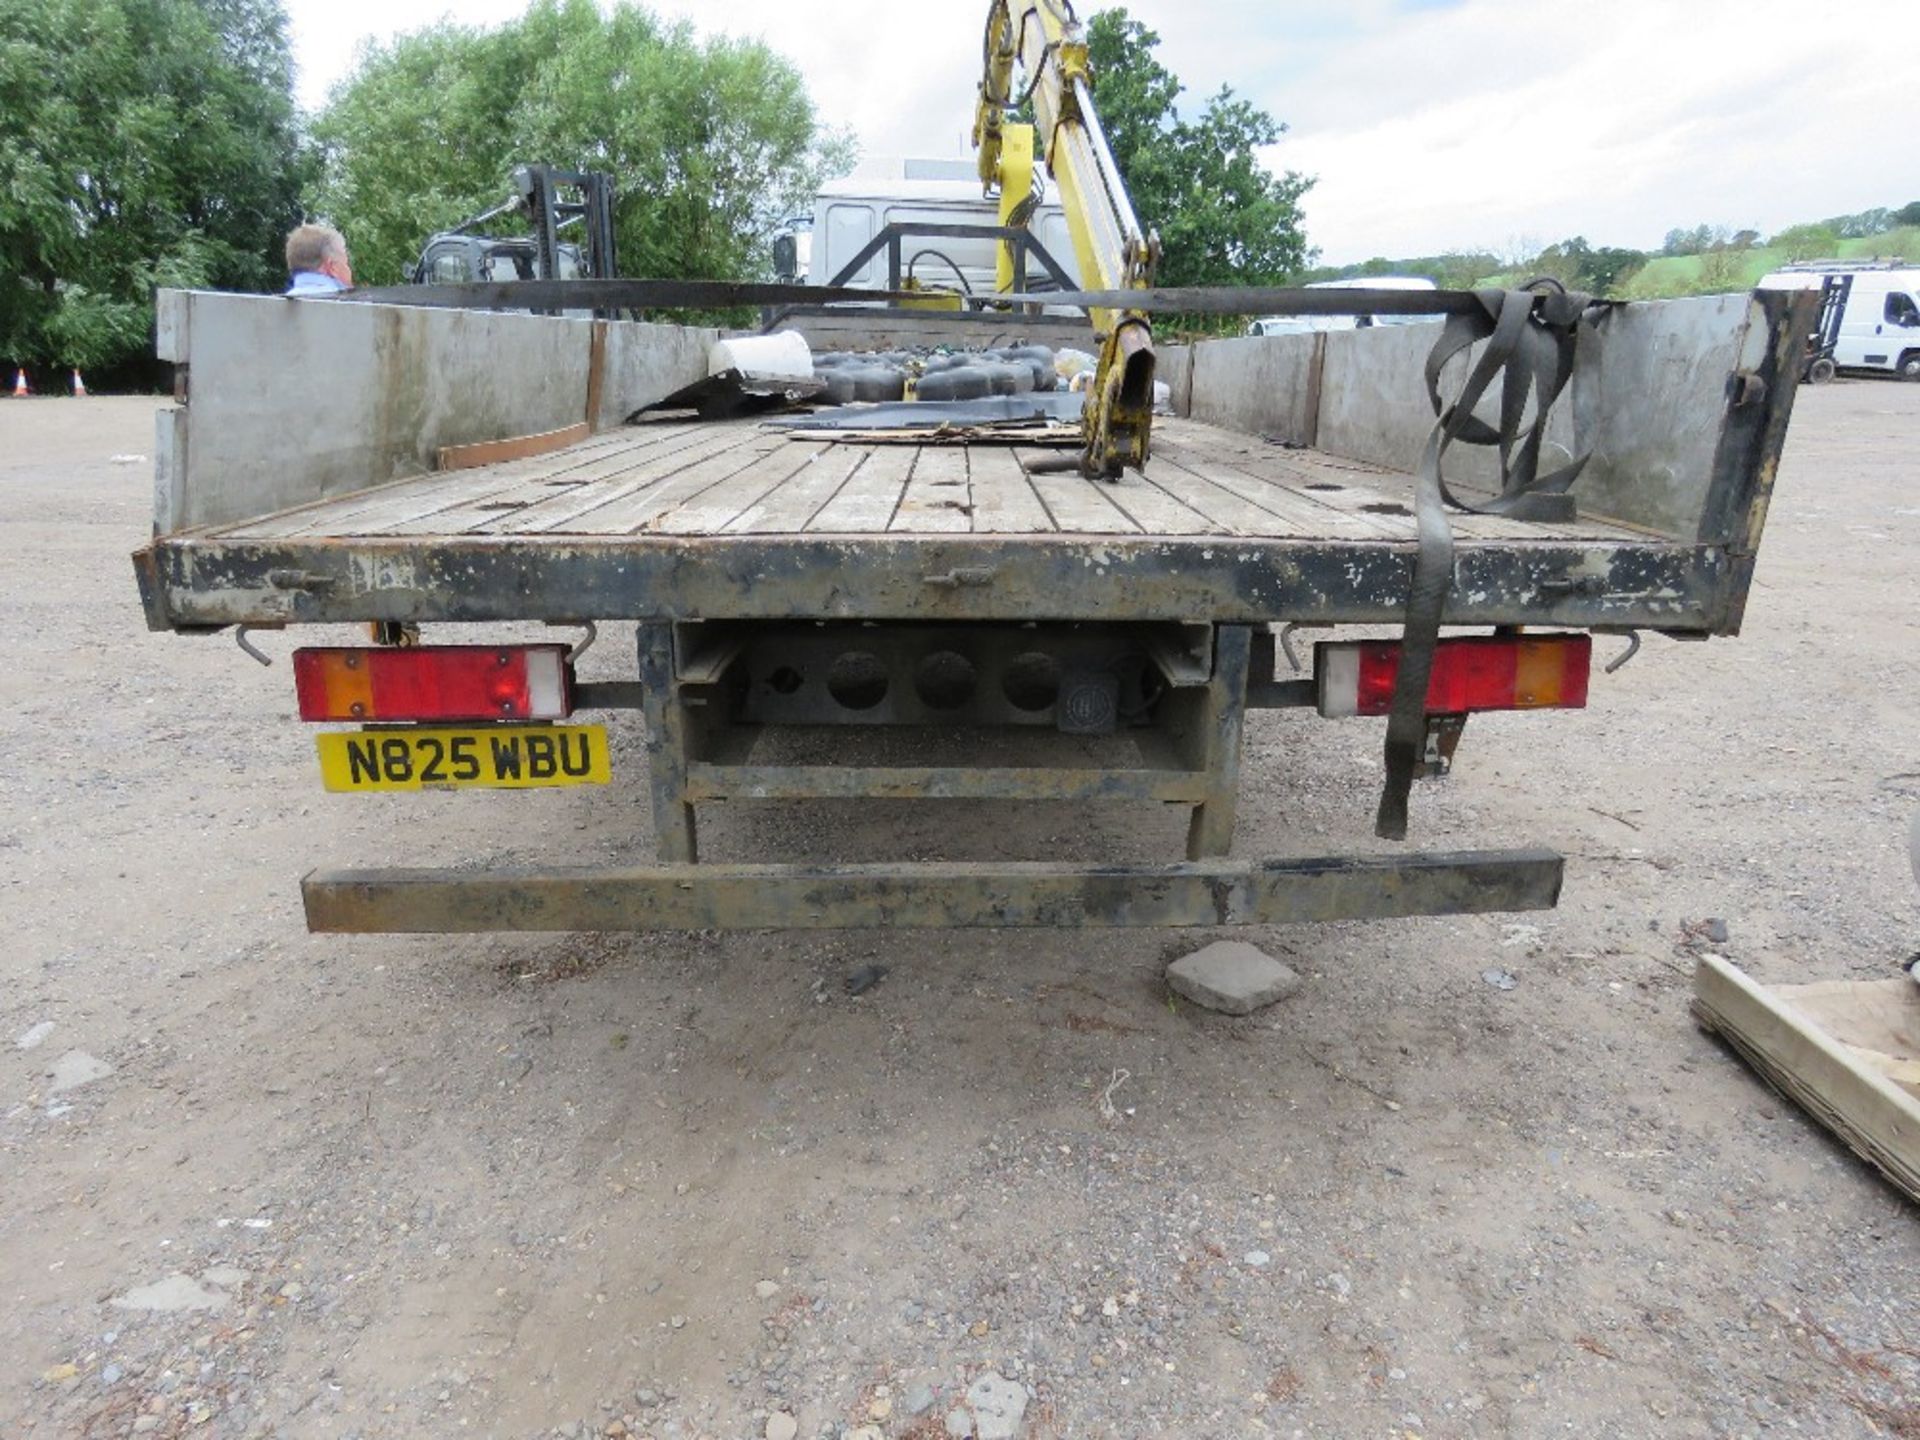 MAN 10-153 FLAT BED LORRY WITH HIAB CRANE REG:N825 WBU. 22FT BED APPROX. MANUAL GEARBOX. WHEN TESTE - Image 12 of 20